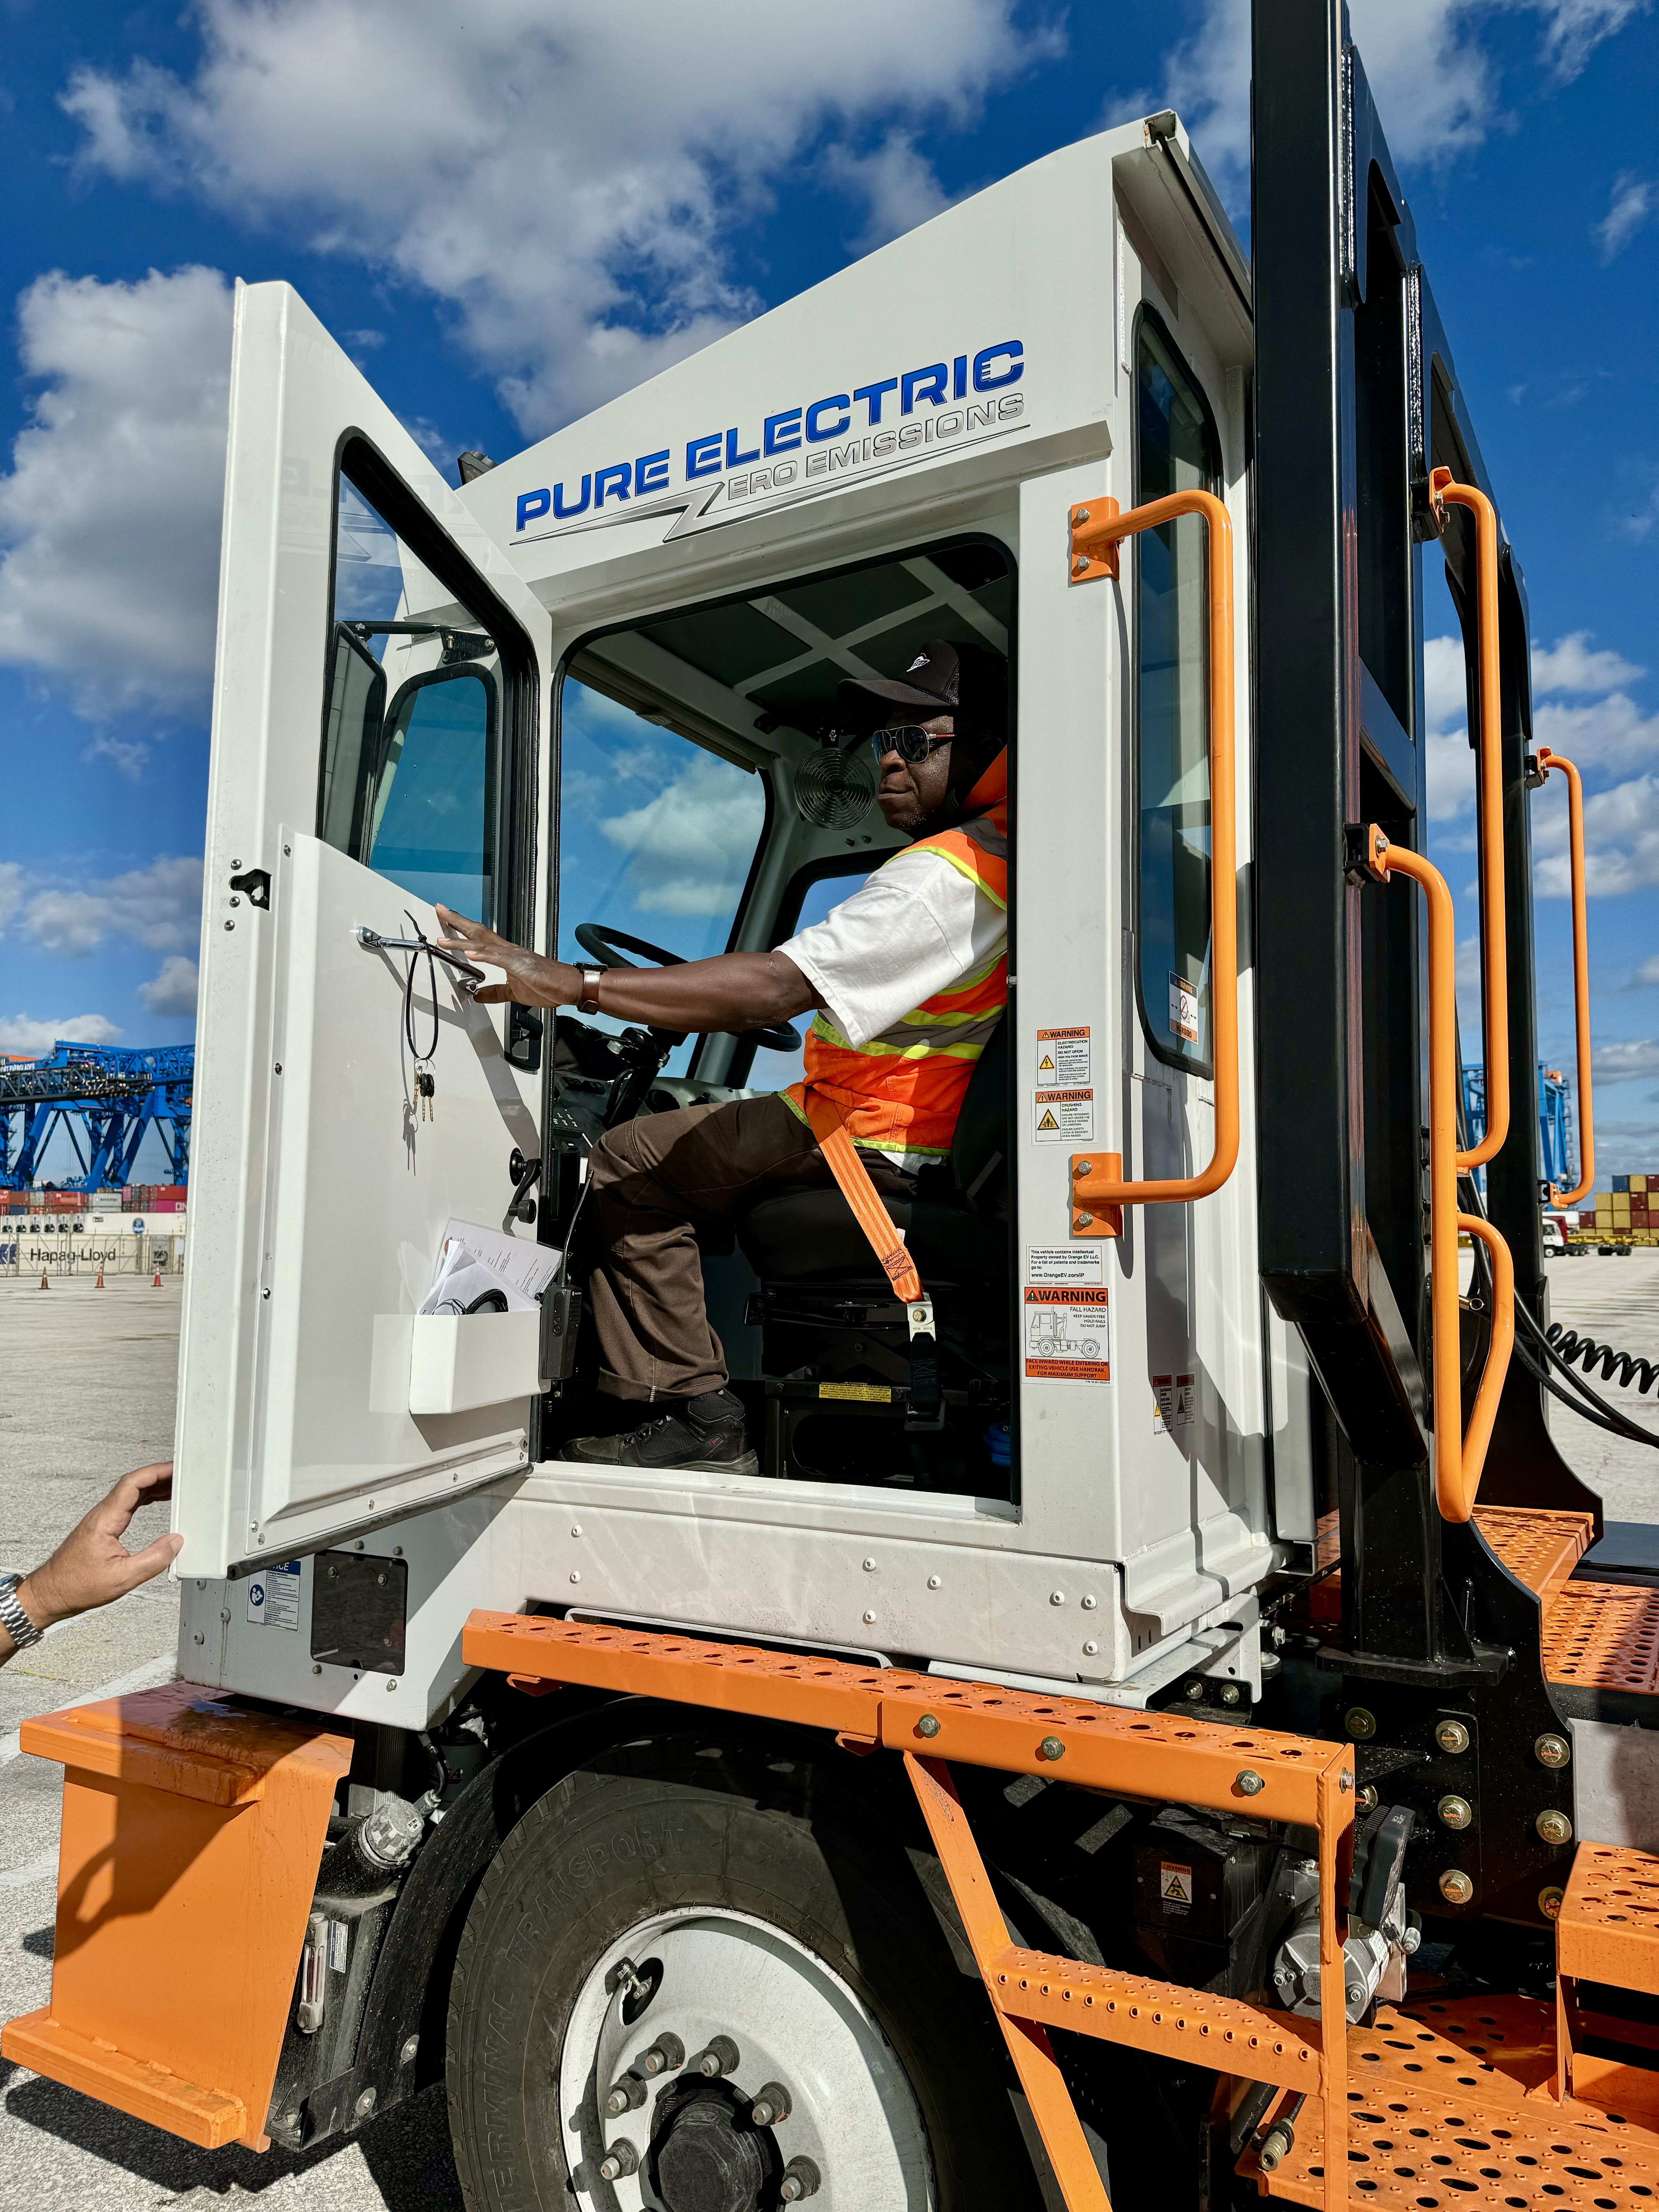 In addition to eliminating diesel exhaust and emissions, Orange EV reports that the Class 8 trucks are designed to handle the most demanding needs of port operations, making their product an ideal choice for Port Everglades which handles more than 1 million TEUs (twenty-foot equivalent units) annually and has a reliable intermodal operation with a near-dock rail system and immediate access to the interstate. 